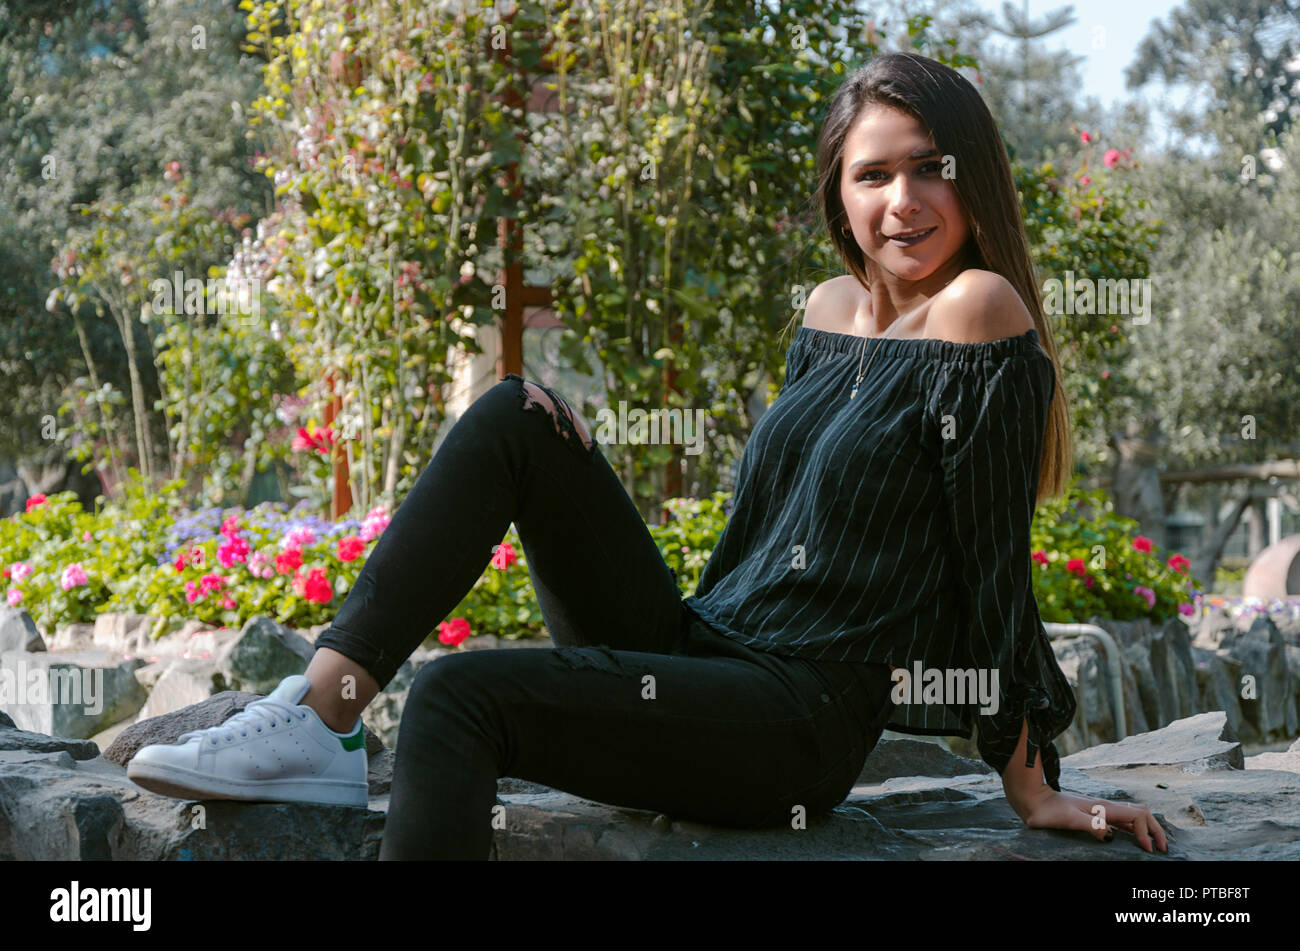 Sport fashion Girl sitting on rock in the green park Stock Photo